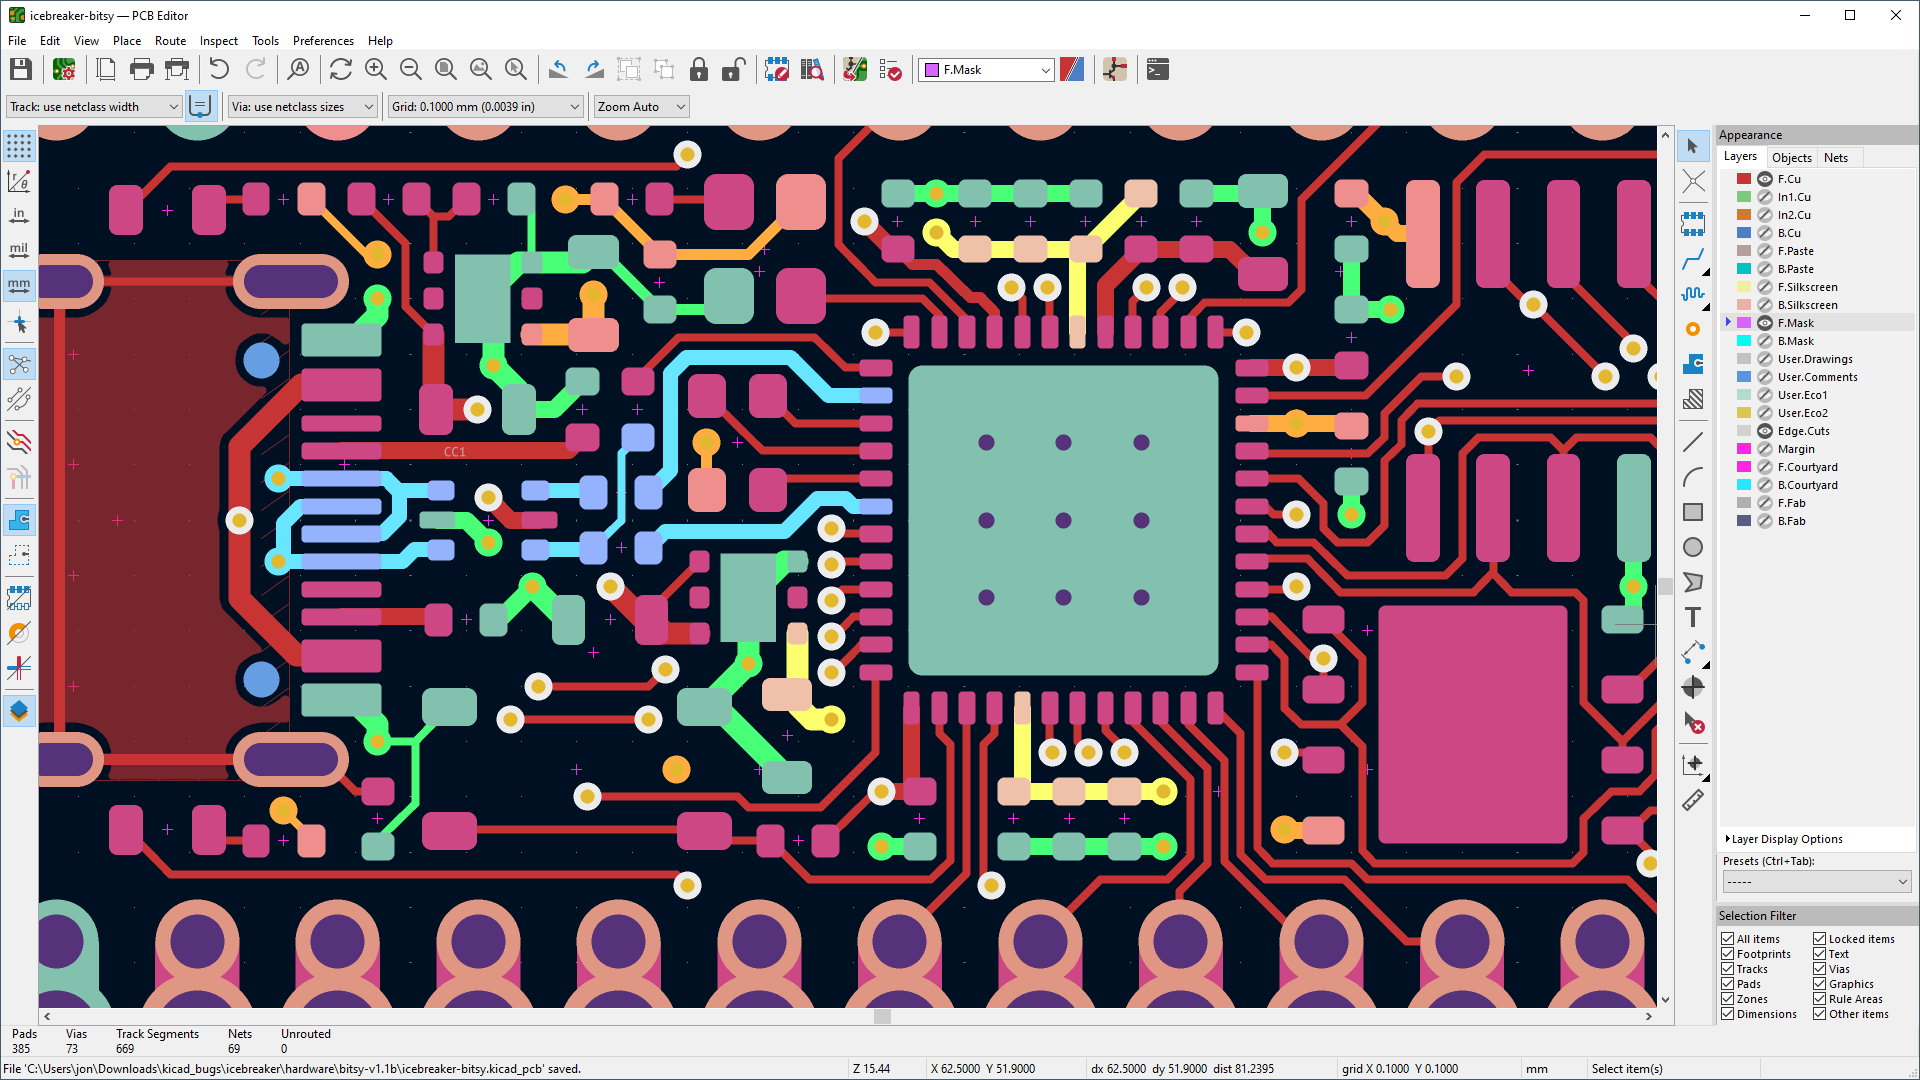 pcb software for mac